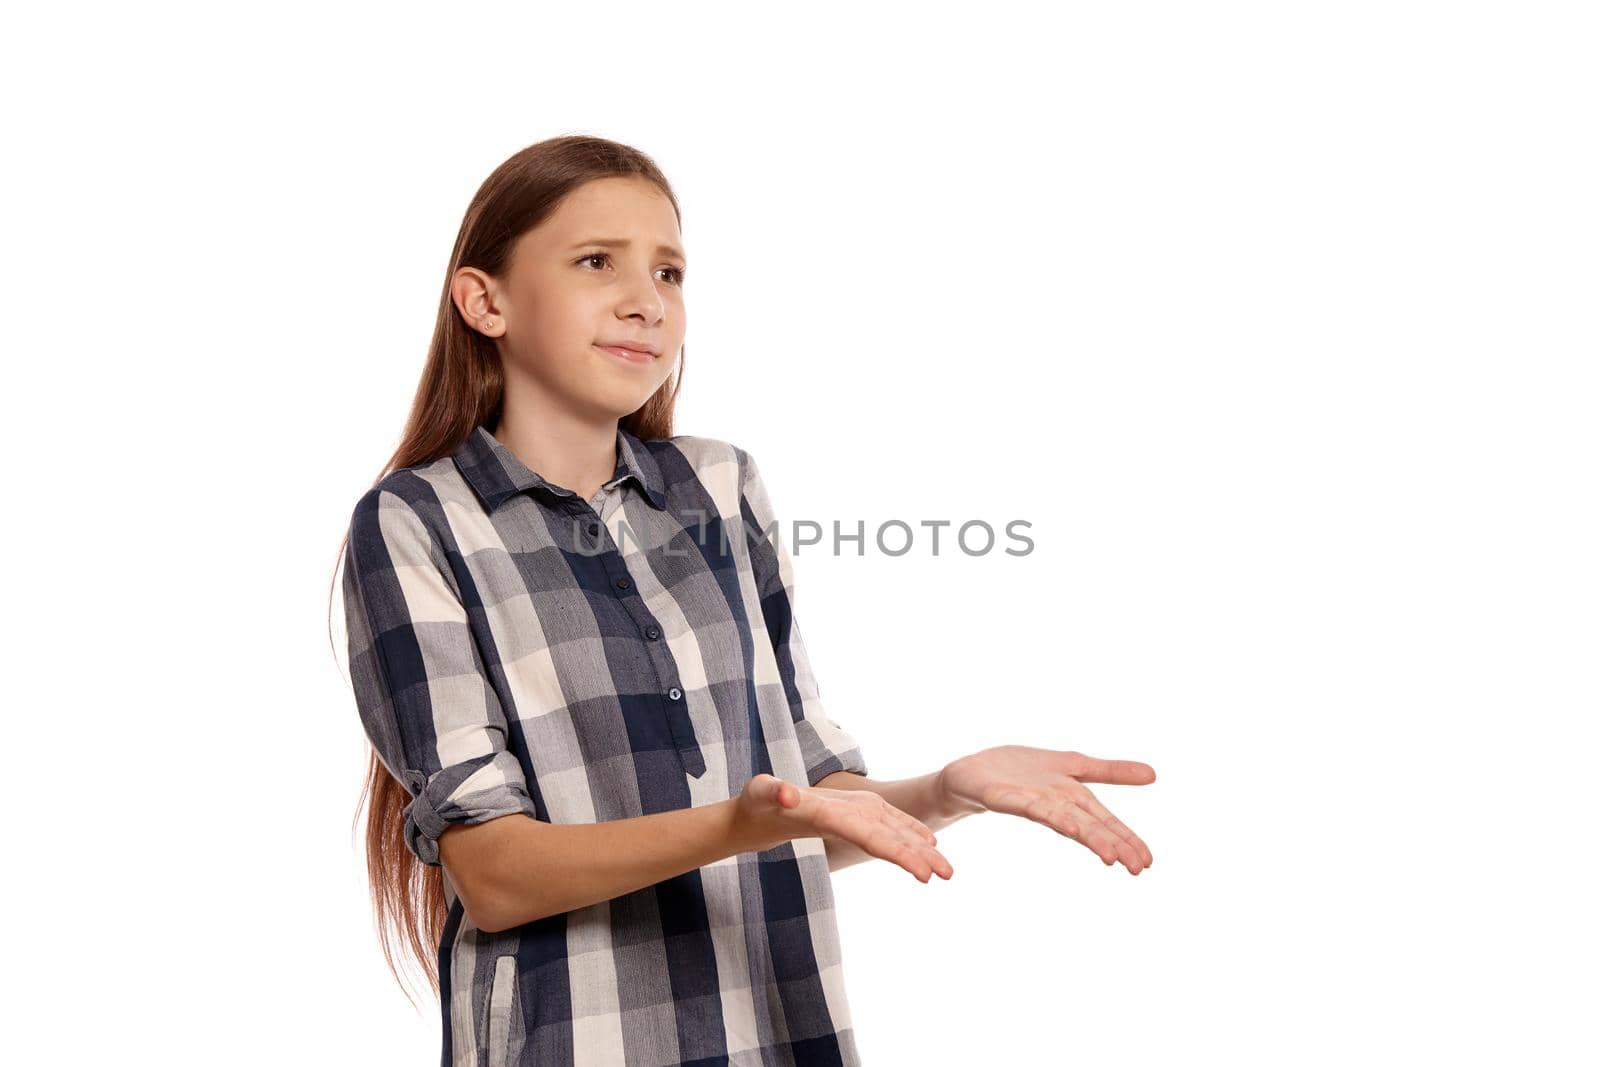 Portrait of a beautiful teenager in a casual checkered shirt looking upset while posing isolated on white studio background. Long hair, healthy clean skin and brown eyes. Sincere emotions concept. Copy space.